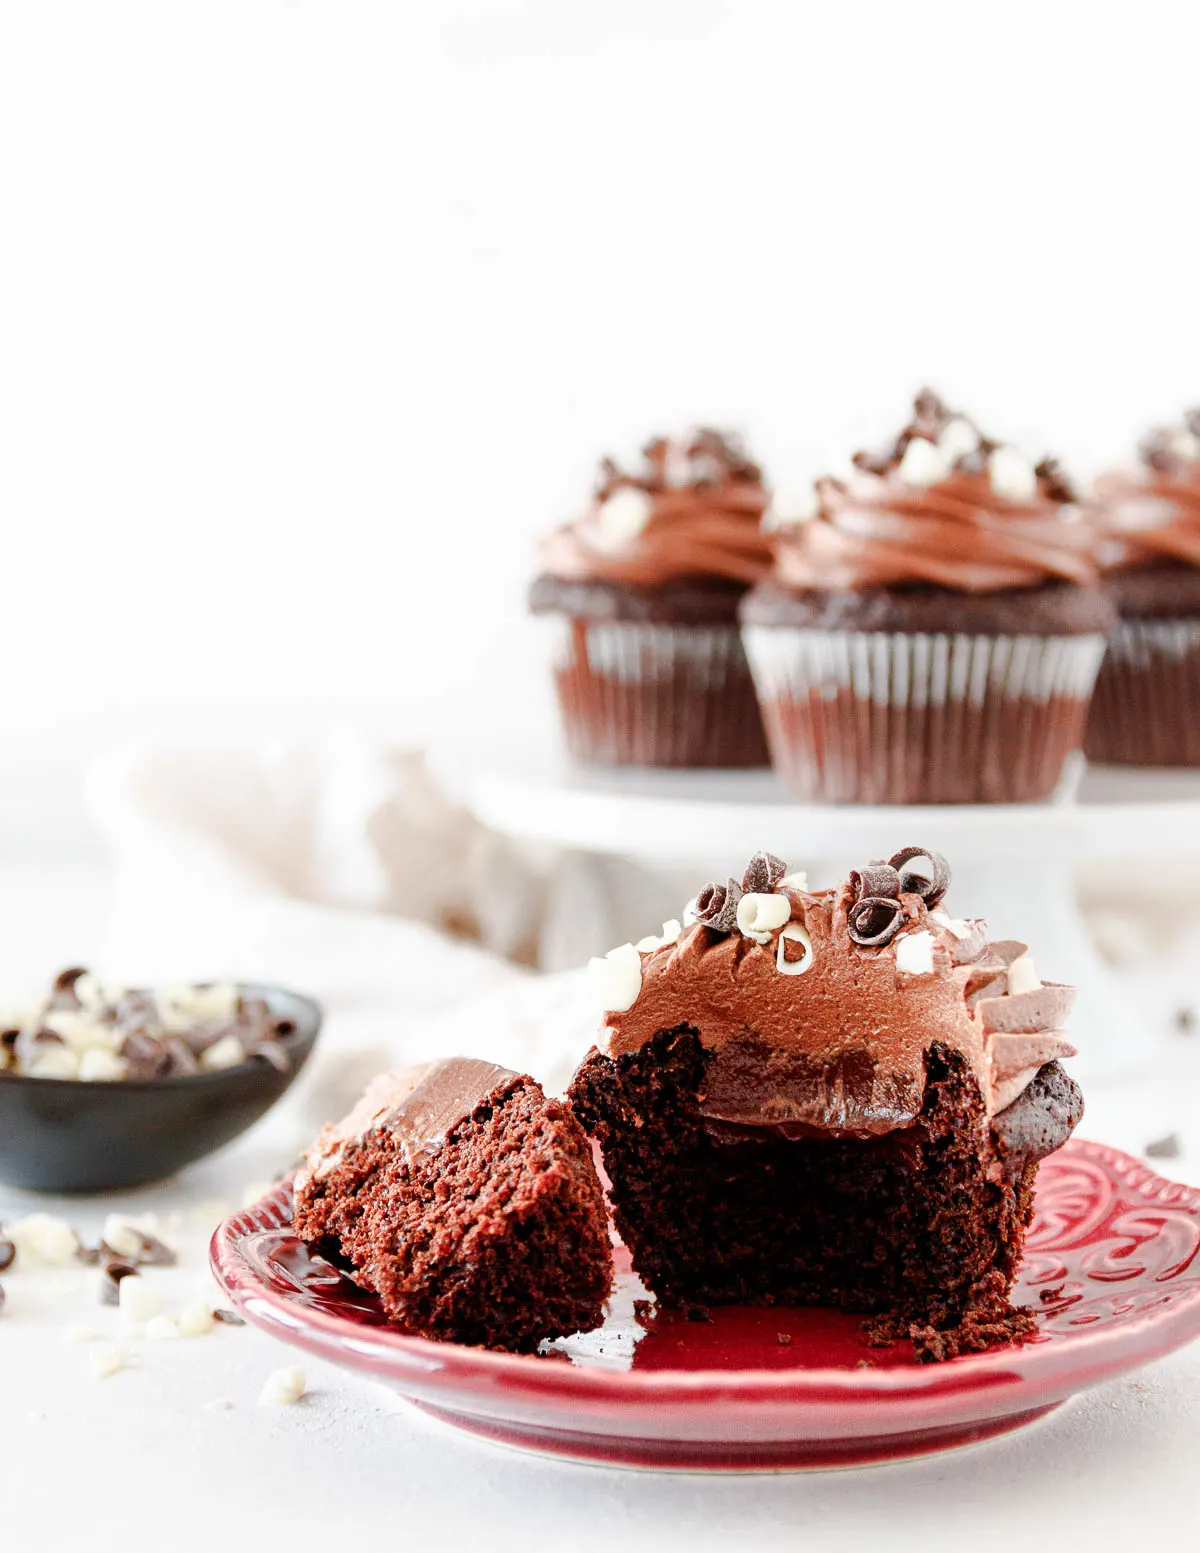 Decorated triple chocolate cupcake on a plate and cut open to show the 3 layers of chocolate